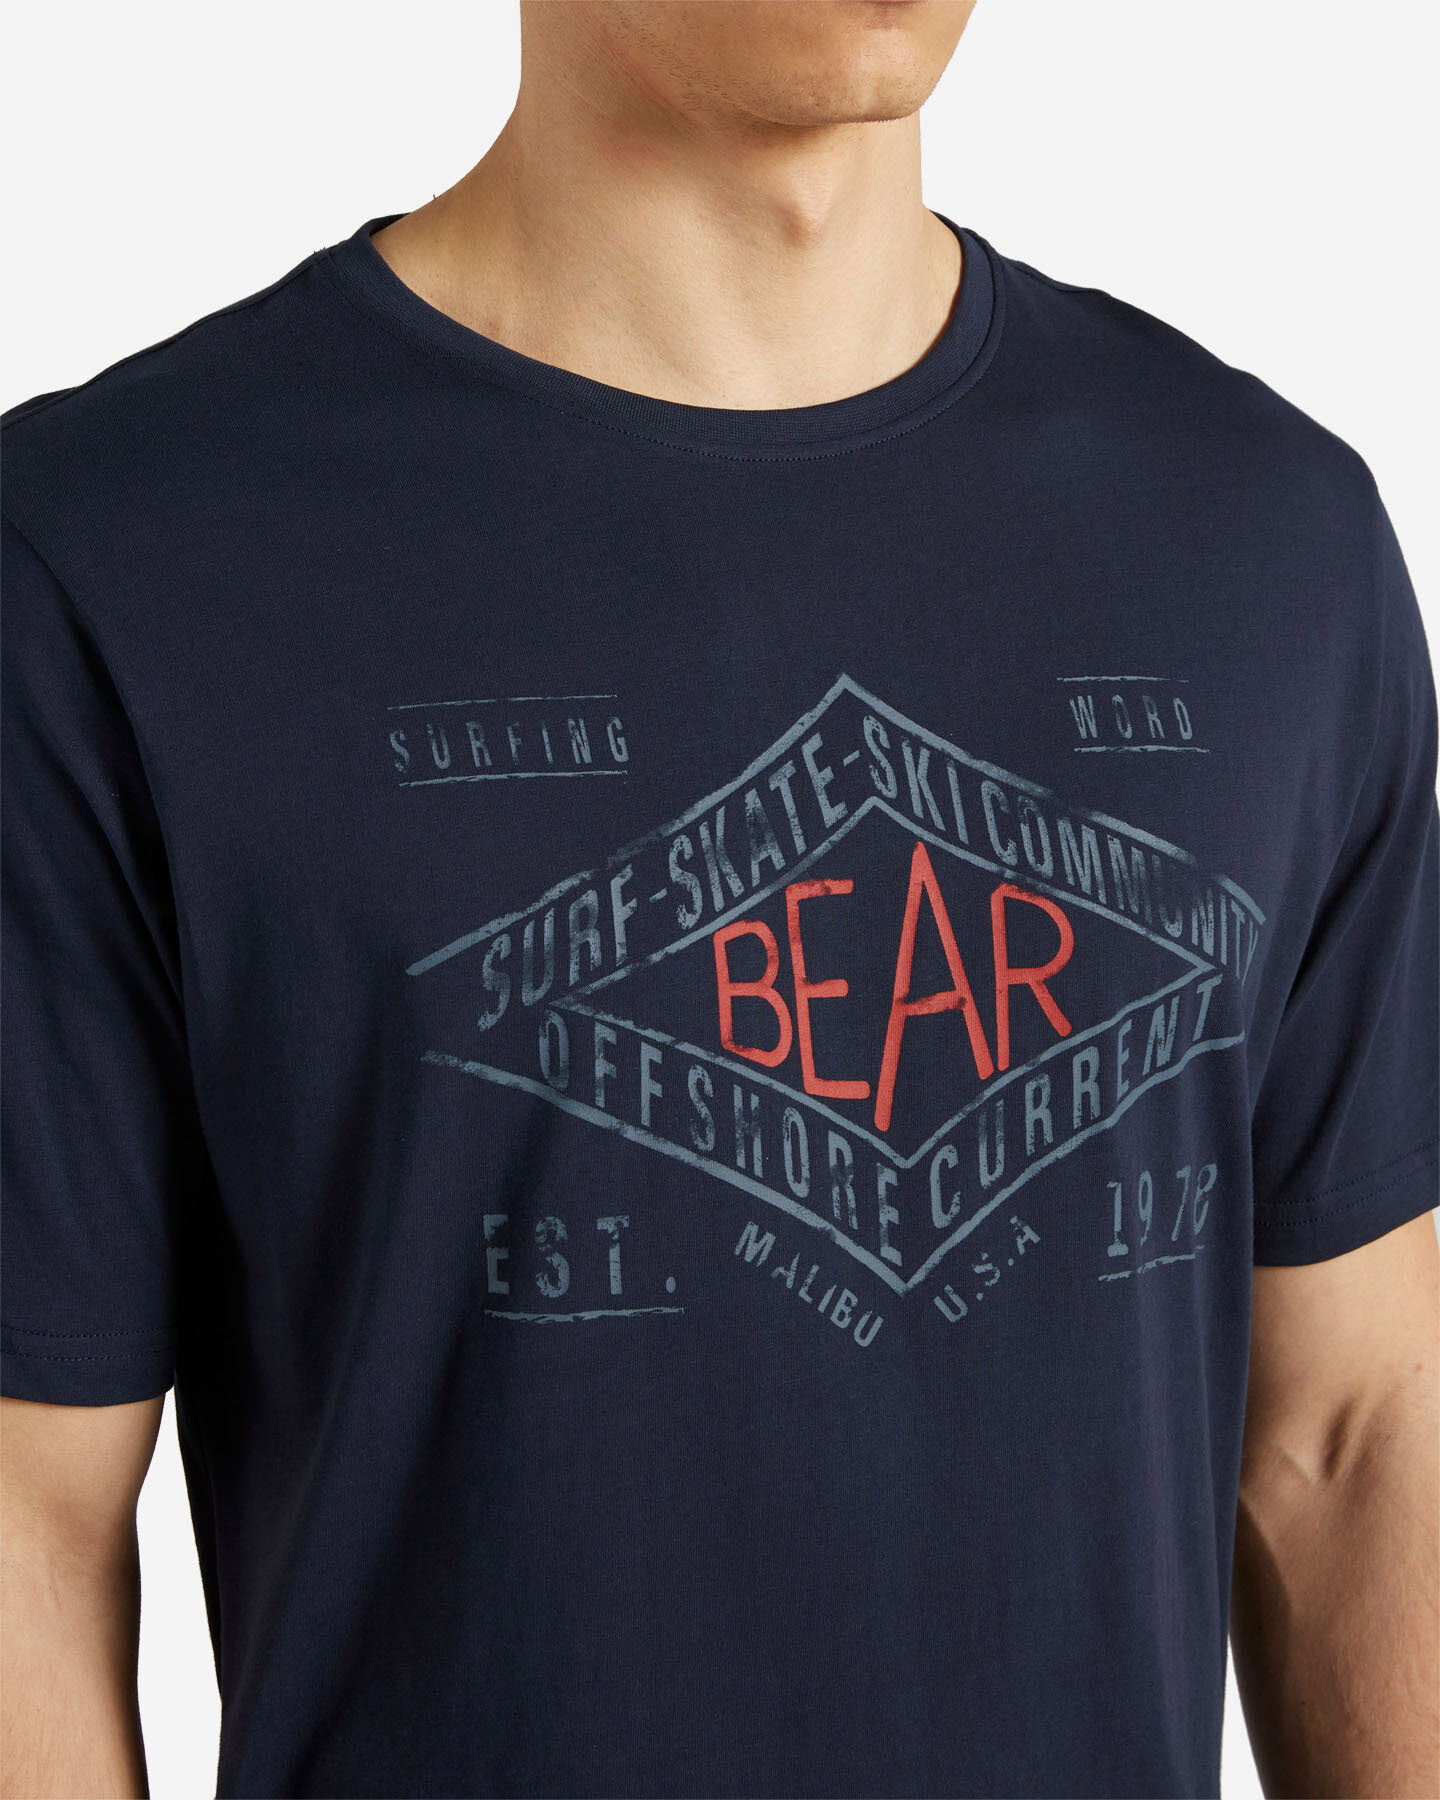  T-Shirt BEAR HERITAGE M S4131624|914|S scatto 4